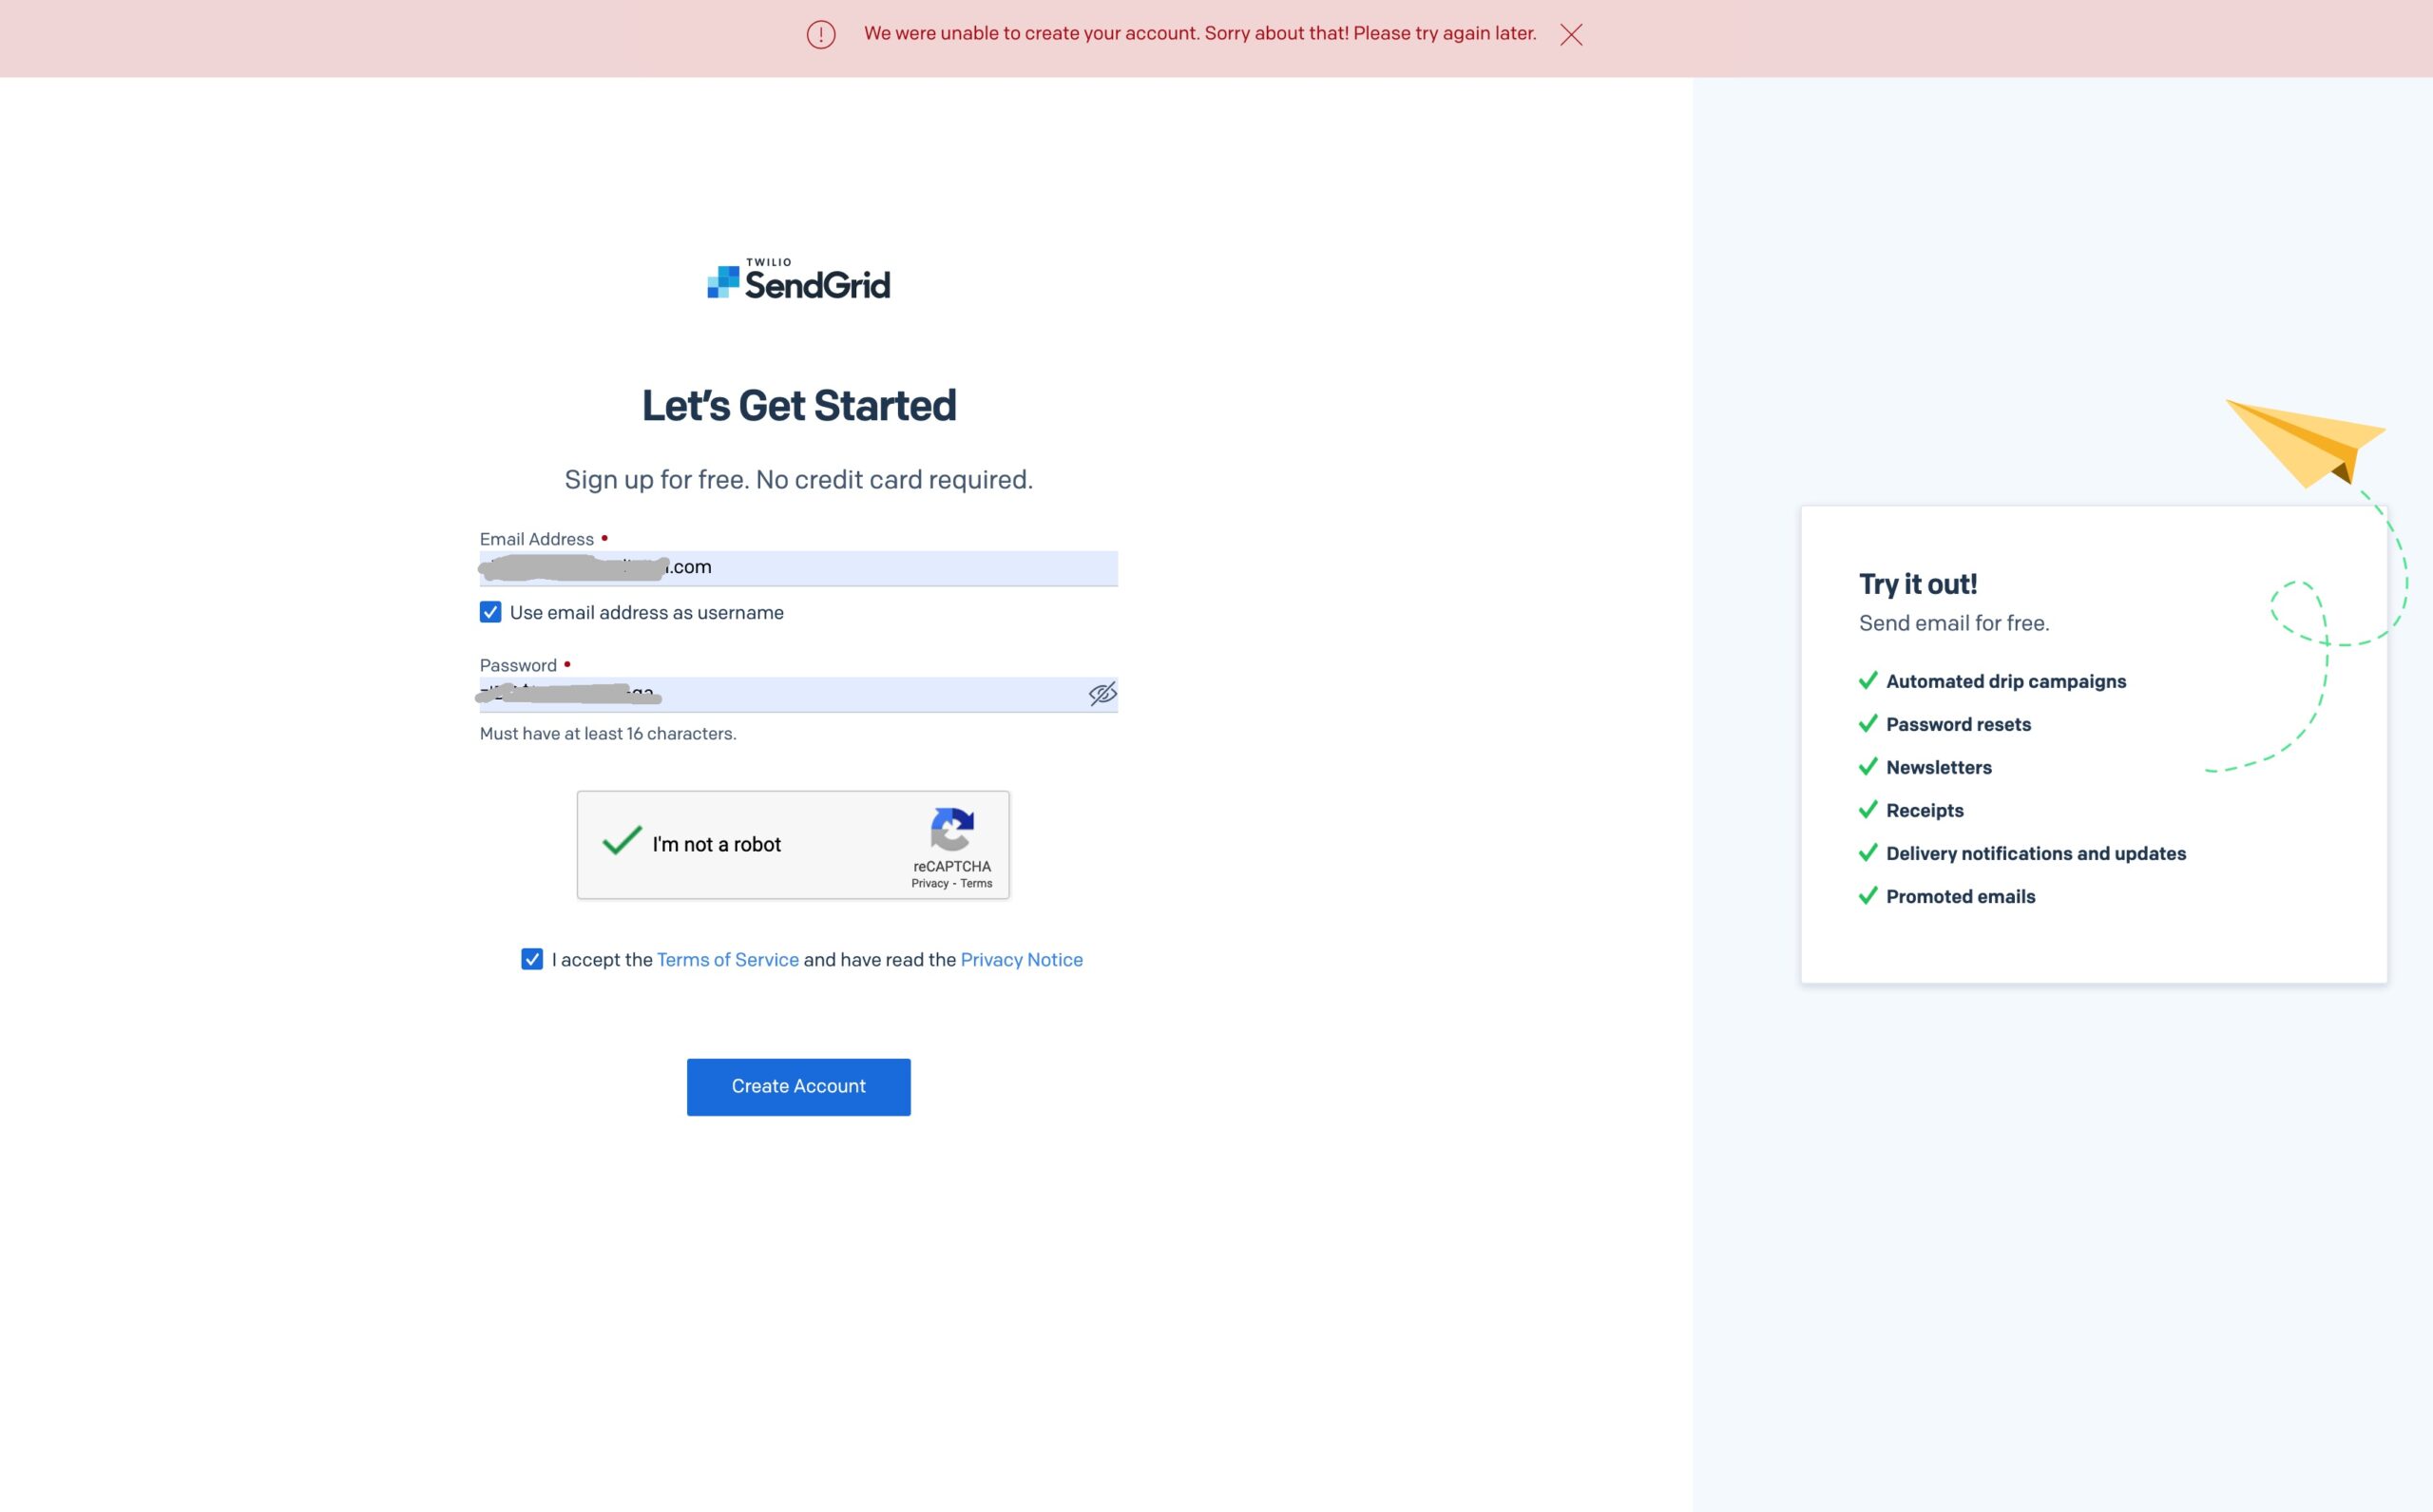 SendGrid Account Creation Error: We were unable to create your account. Sorry about that! Please try again later. [SOLVED]